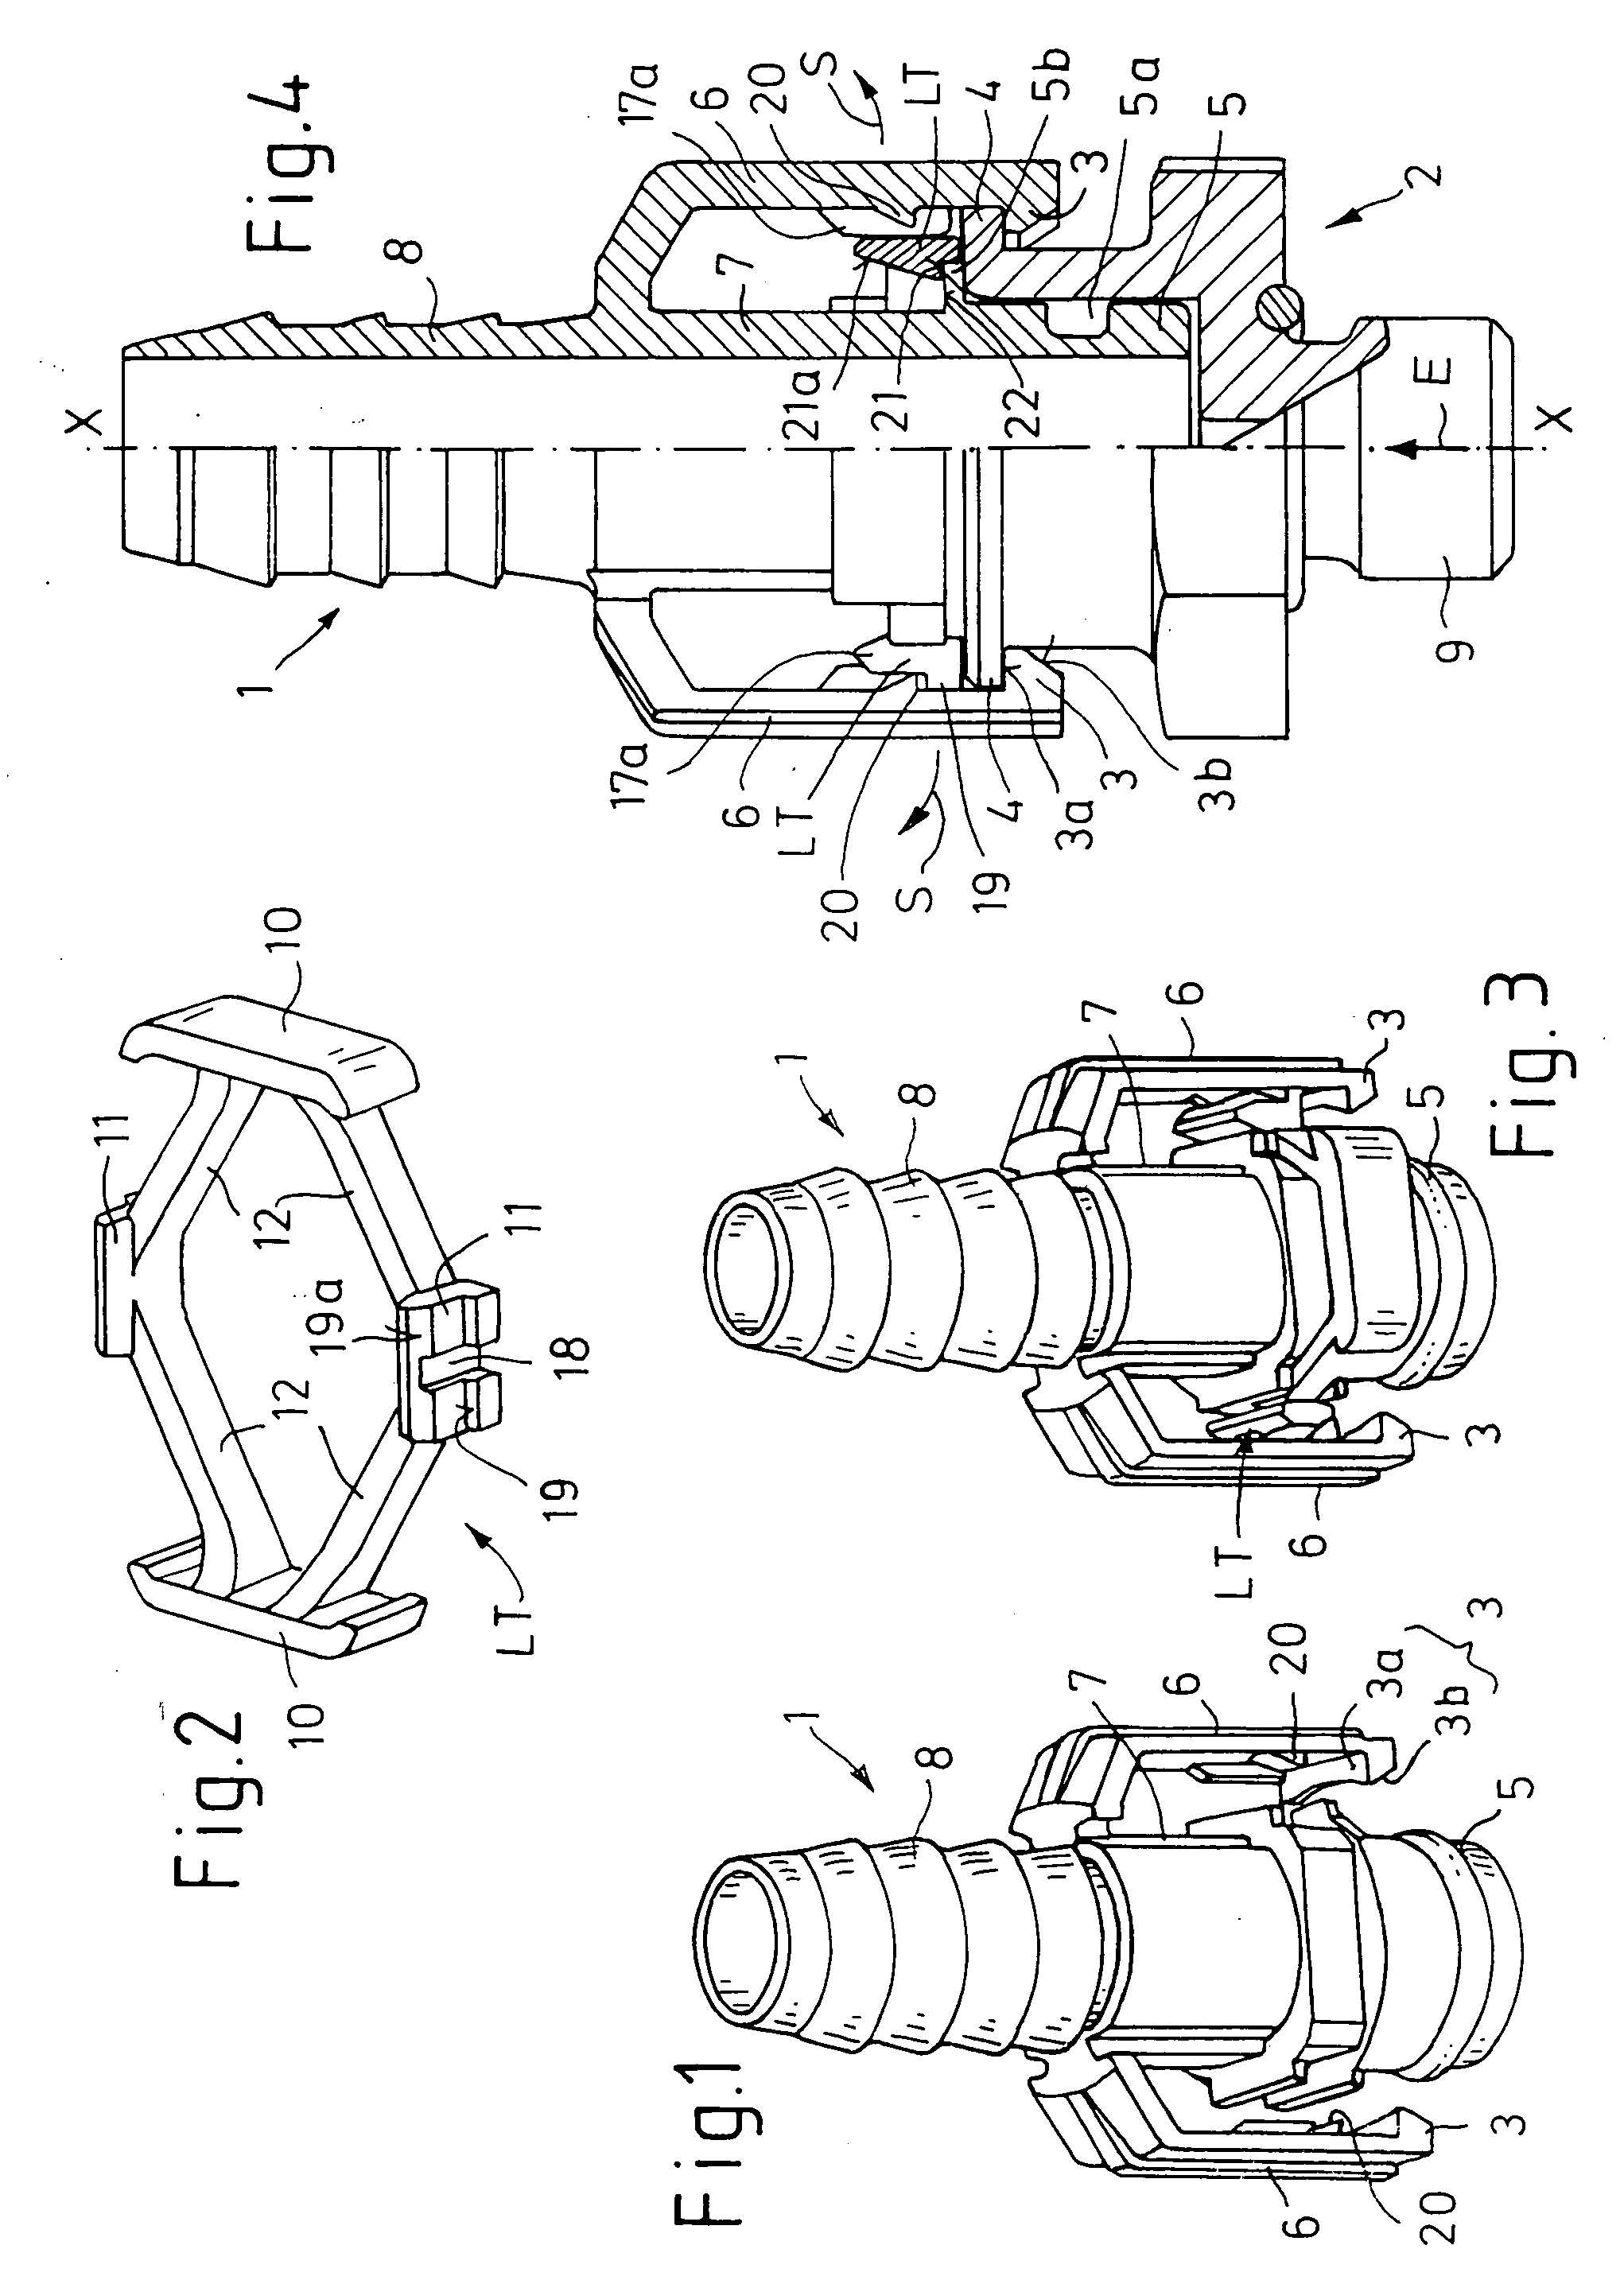 Plug-in coupling for fluid systems